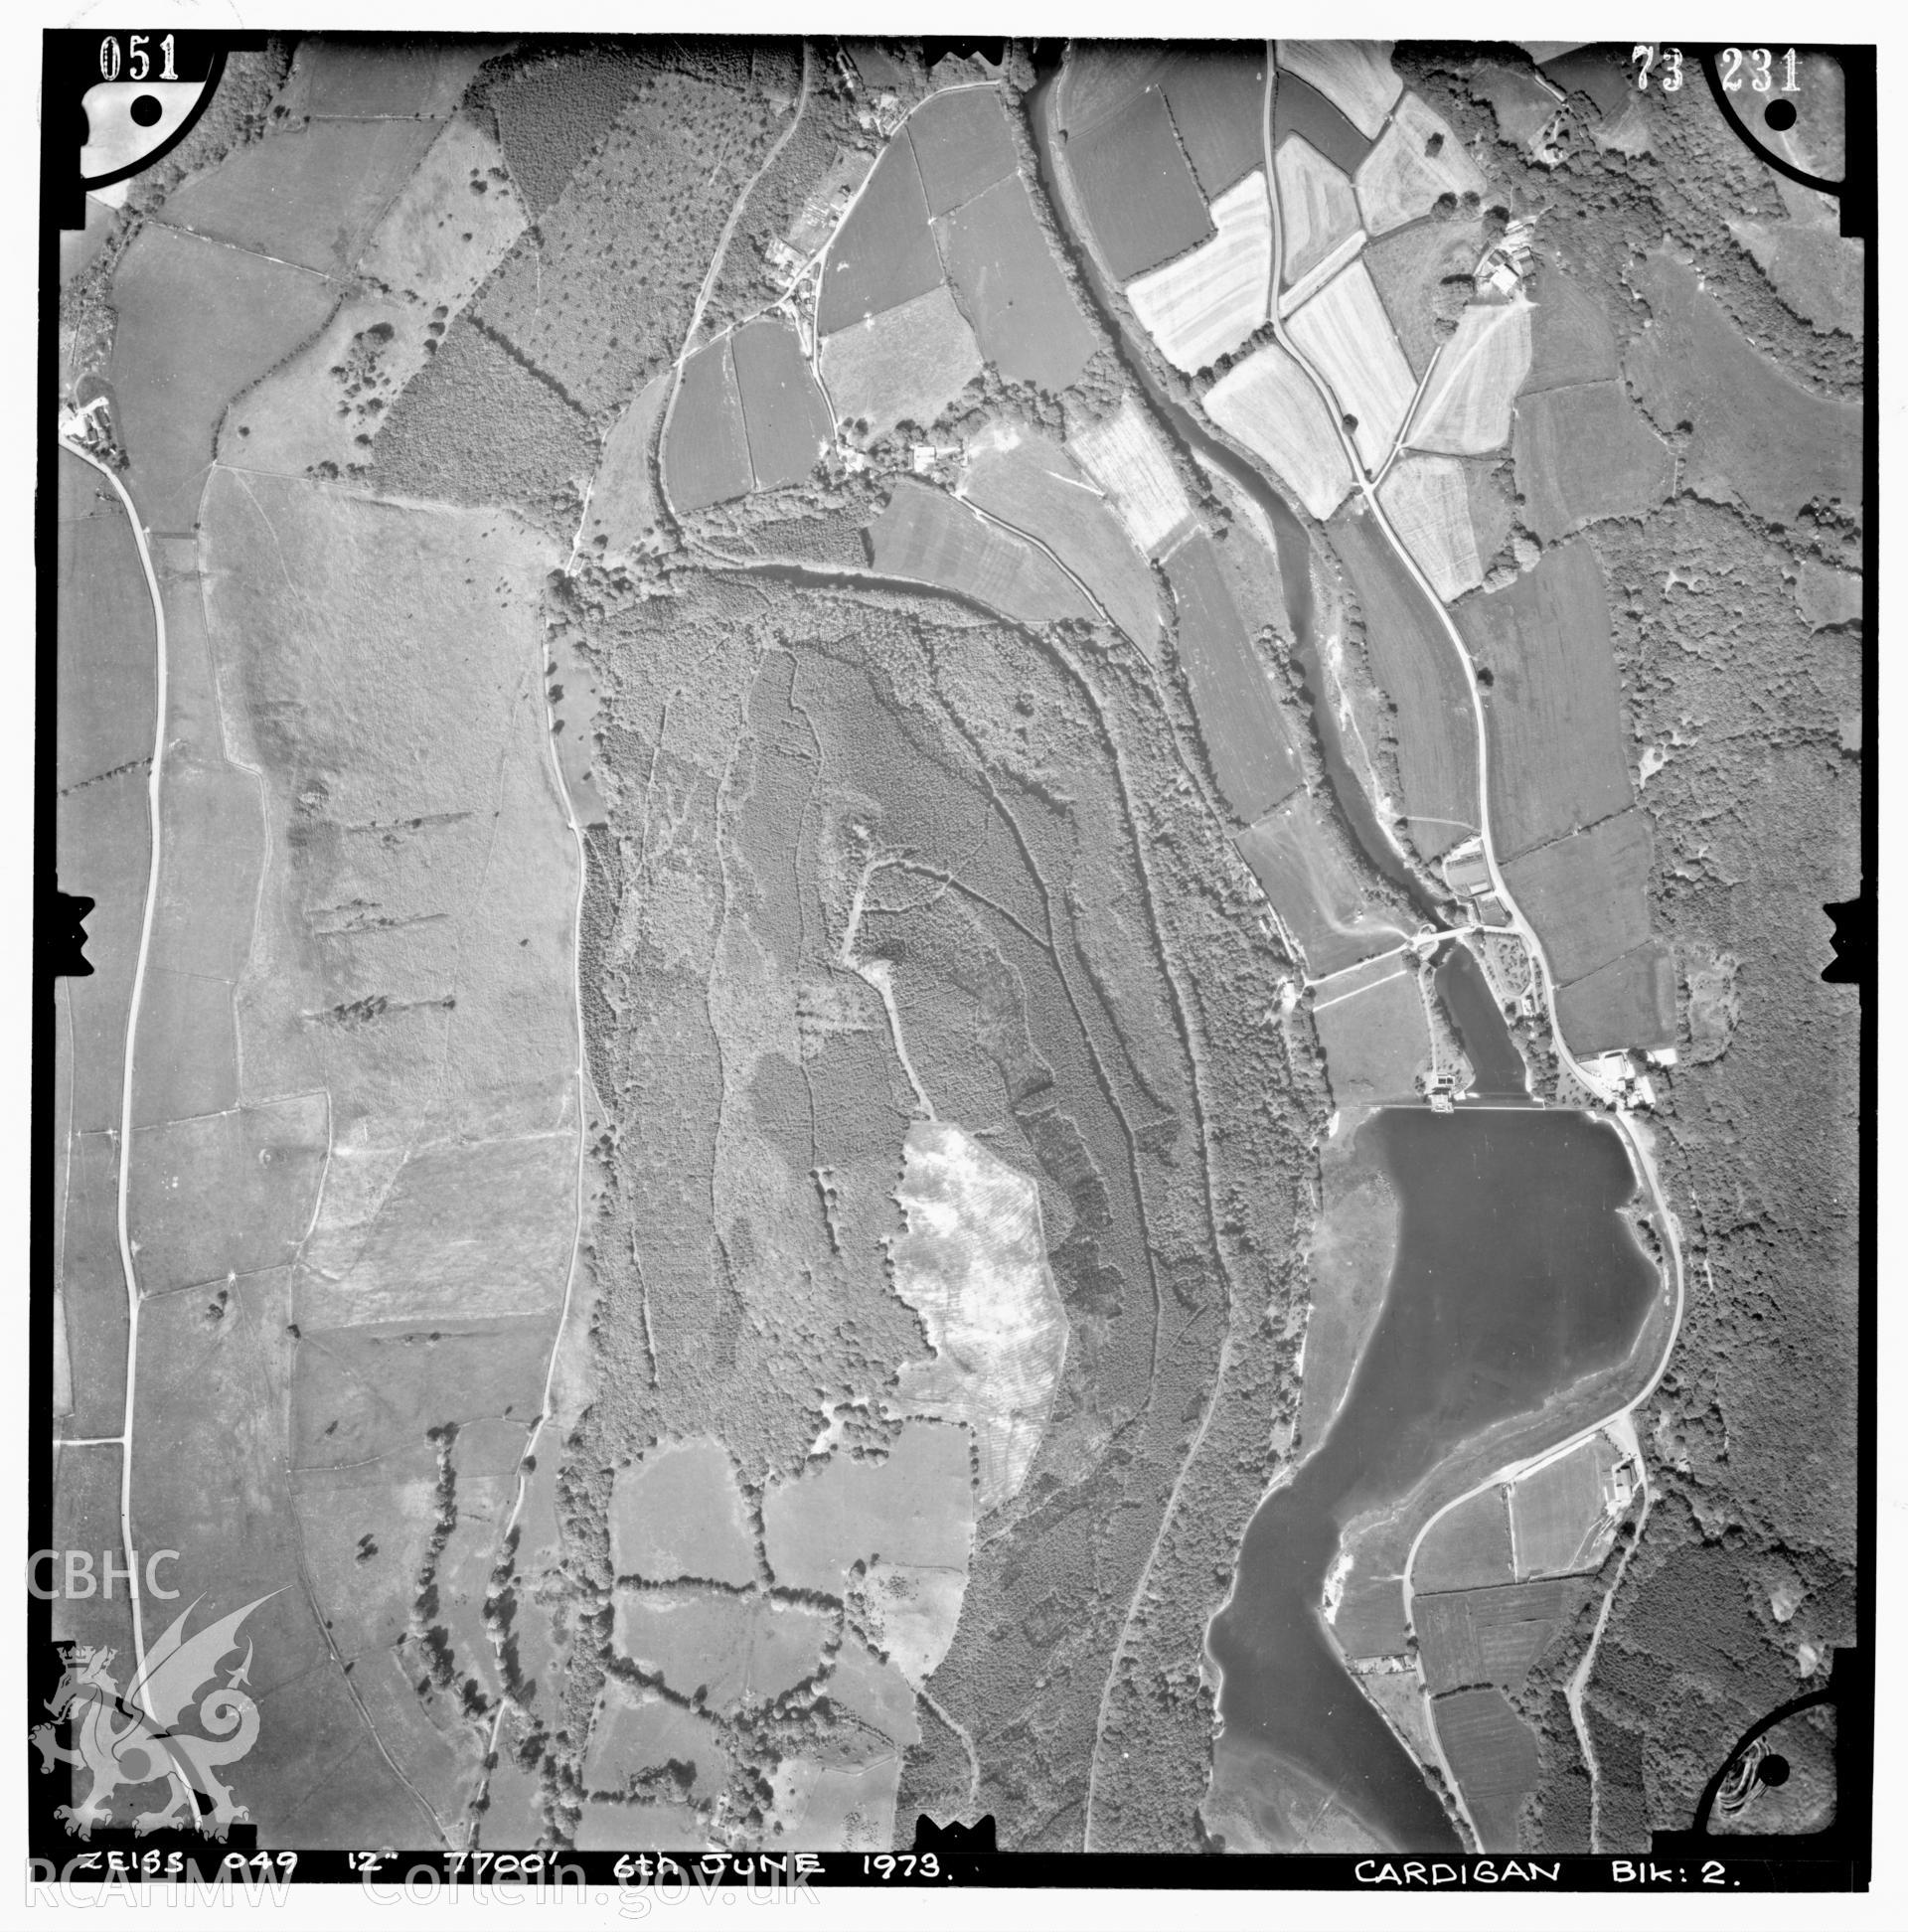 Digitized copy of an aerial photograph showing Mid Wales area, taken by Ordnance Survey, 1975.